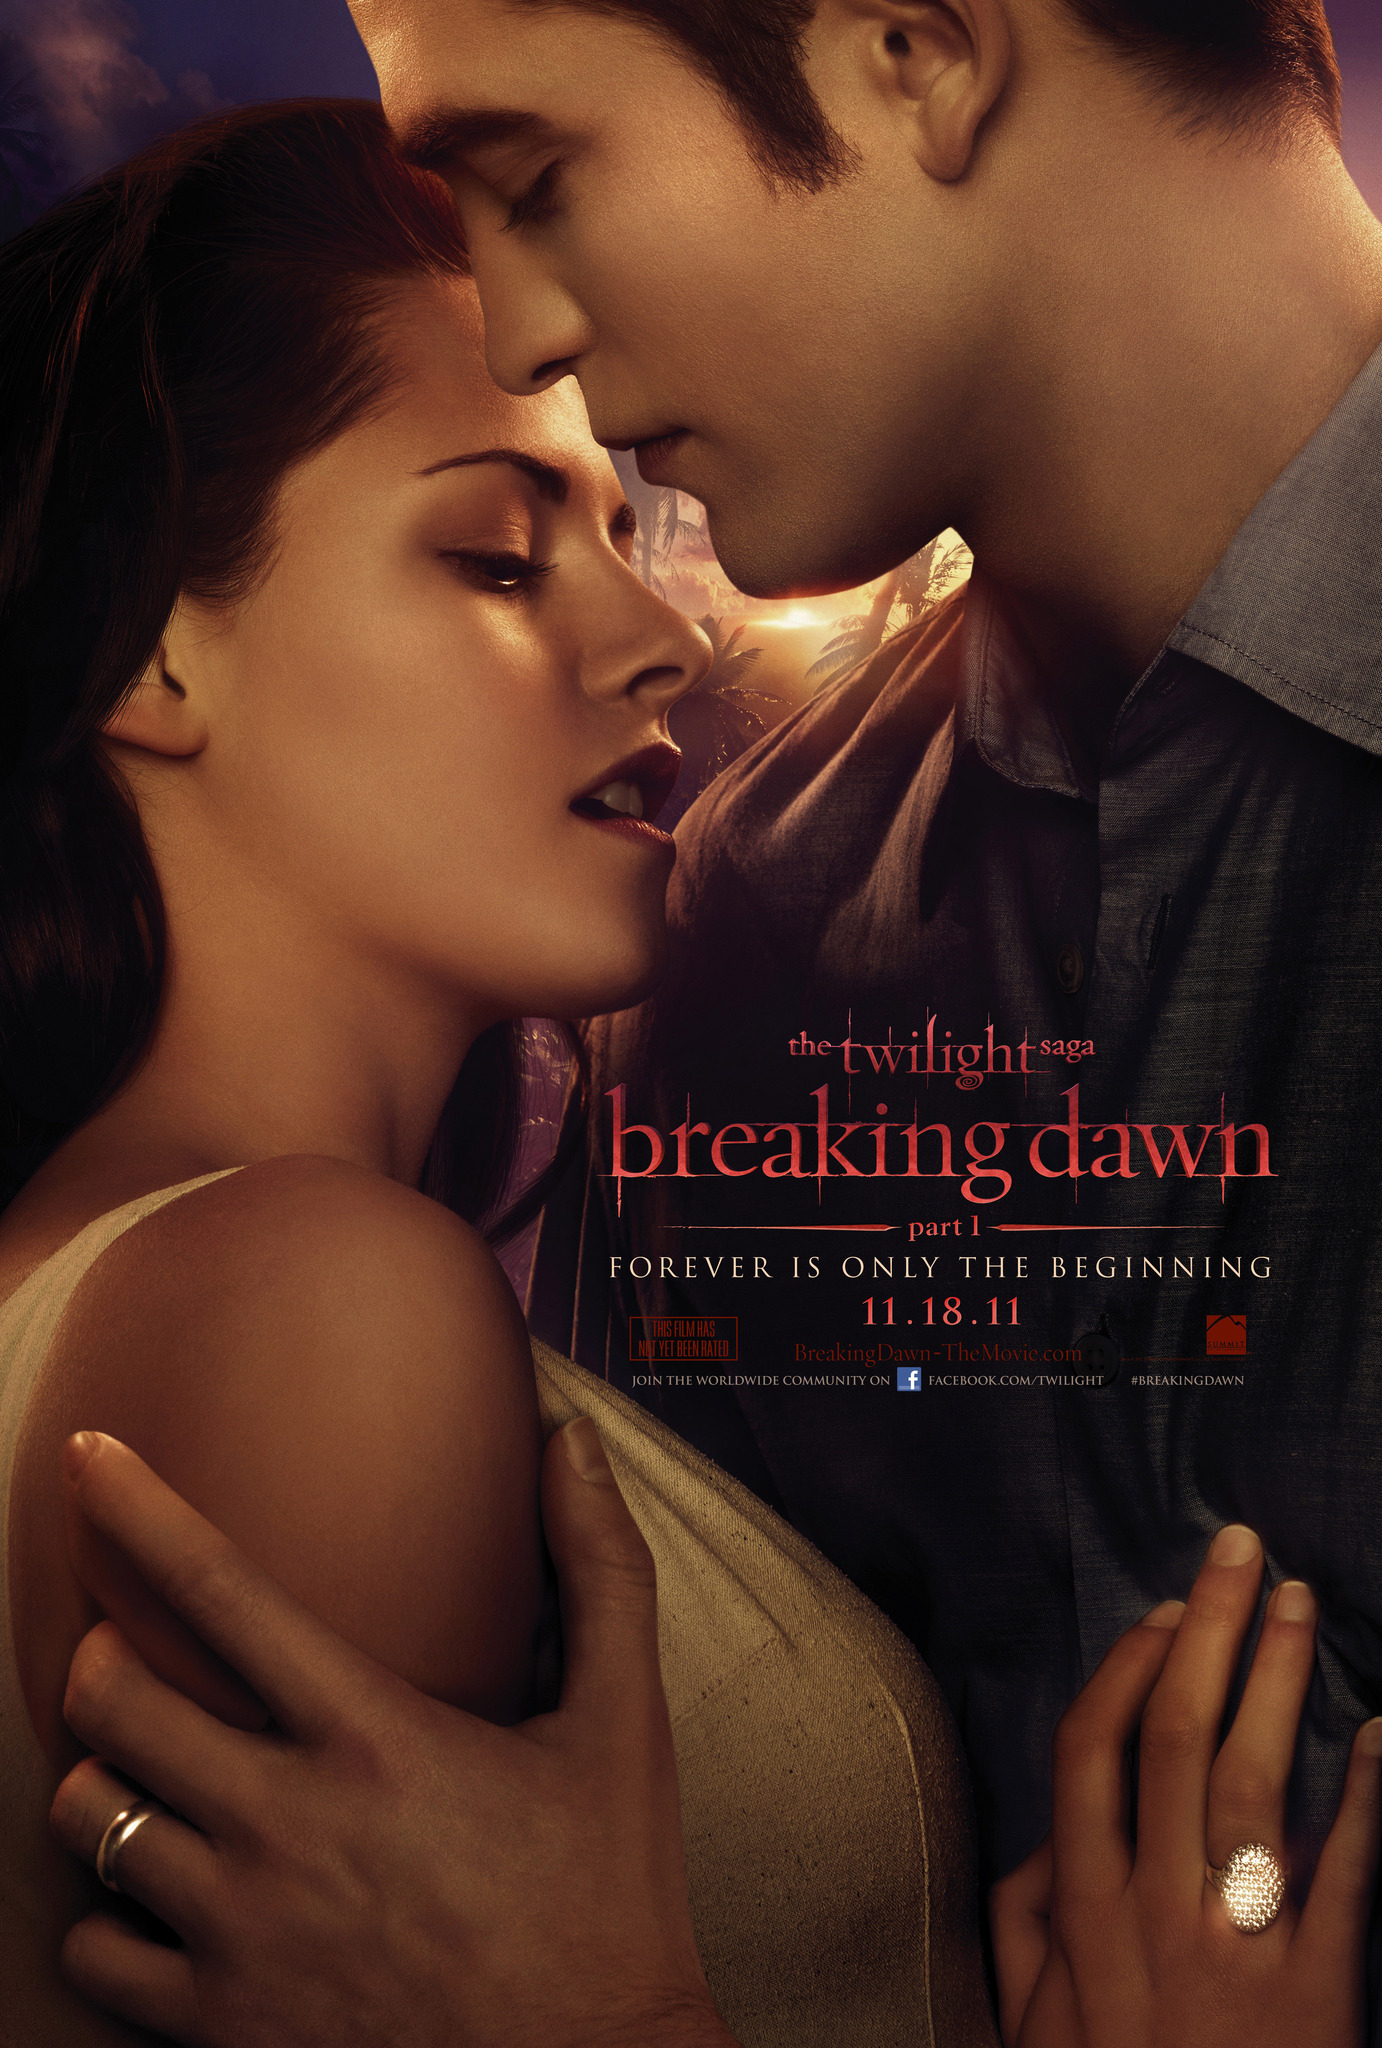 charlotte hawkes laws recommends Twilight Movies Free Downloads